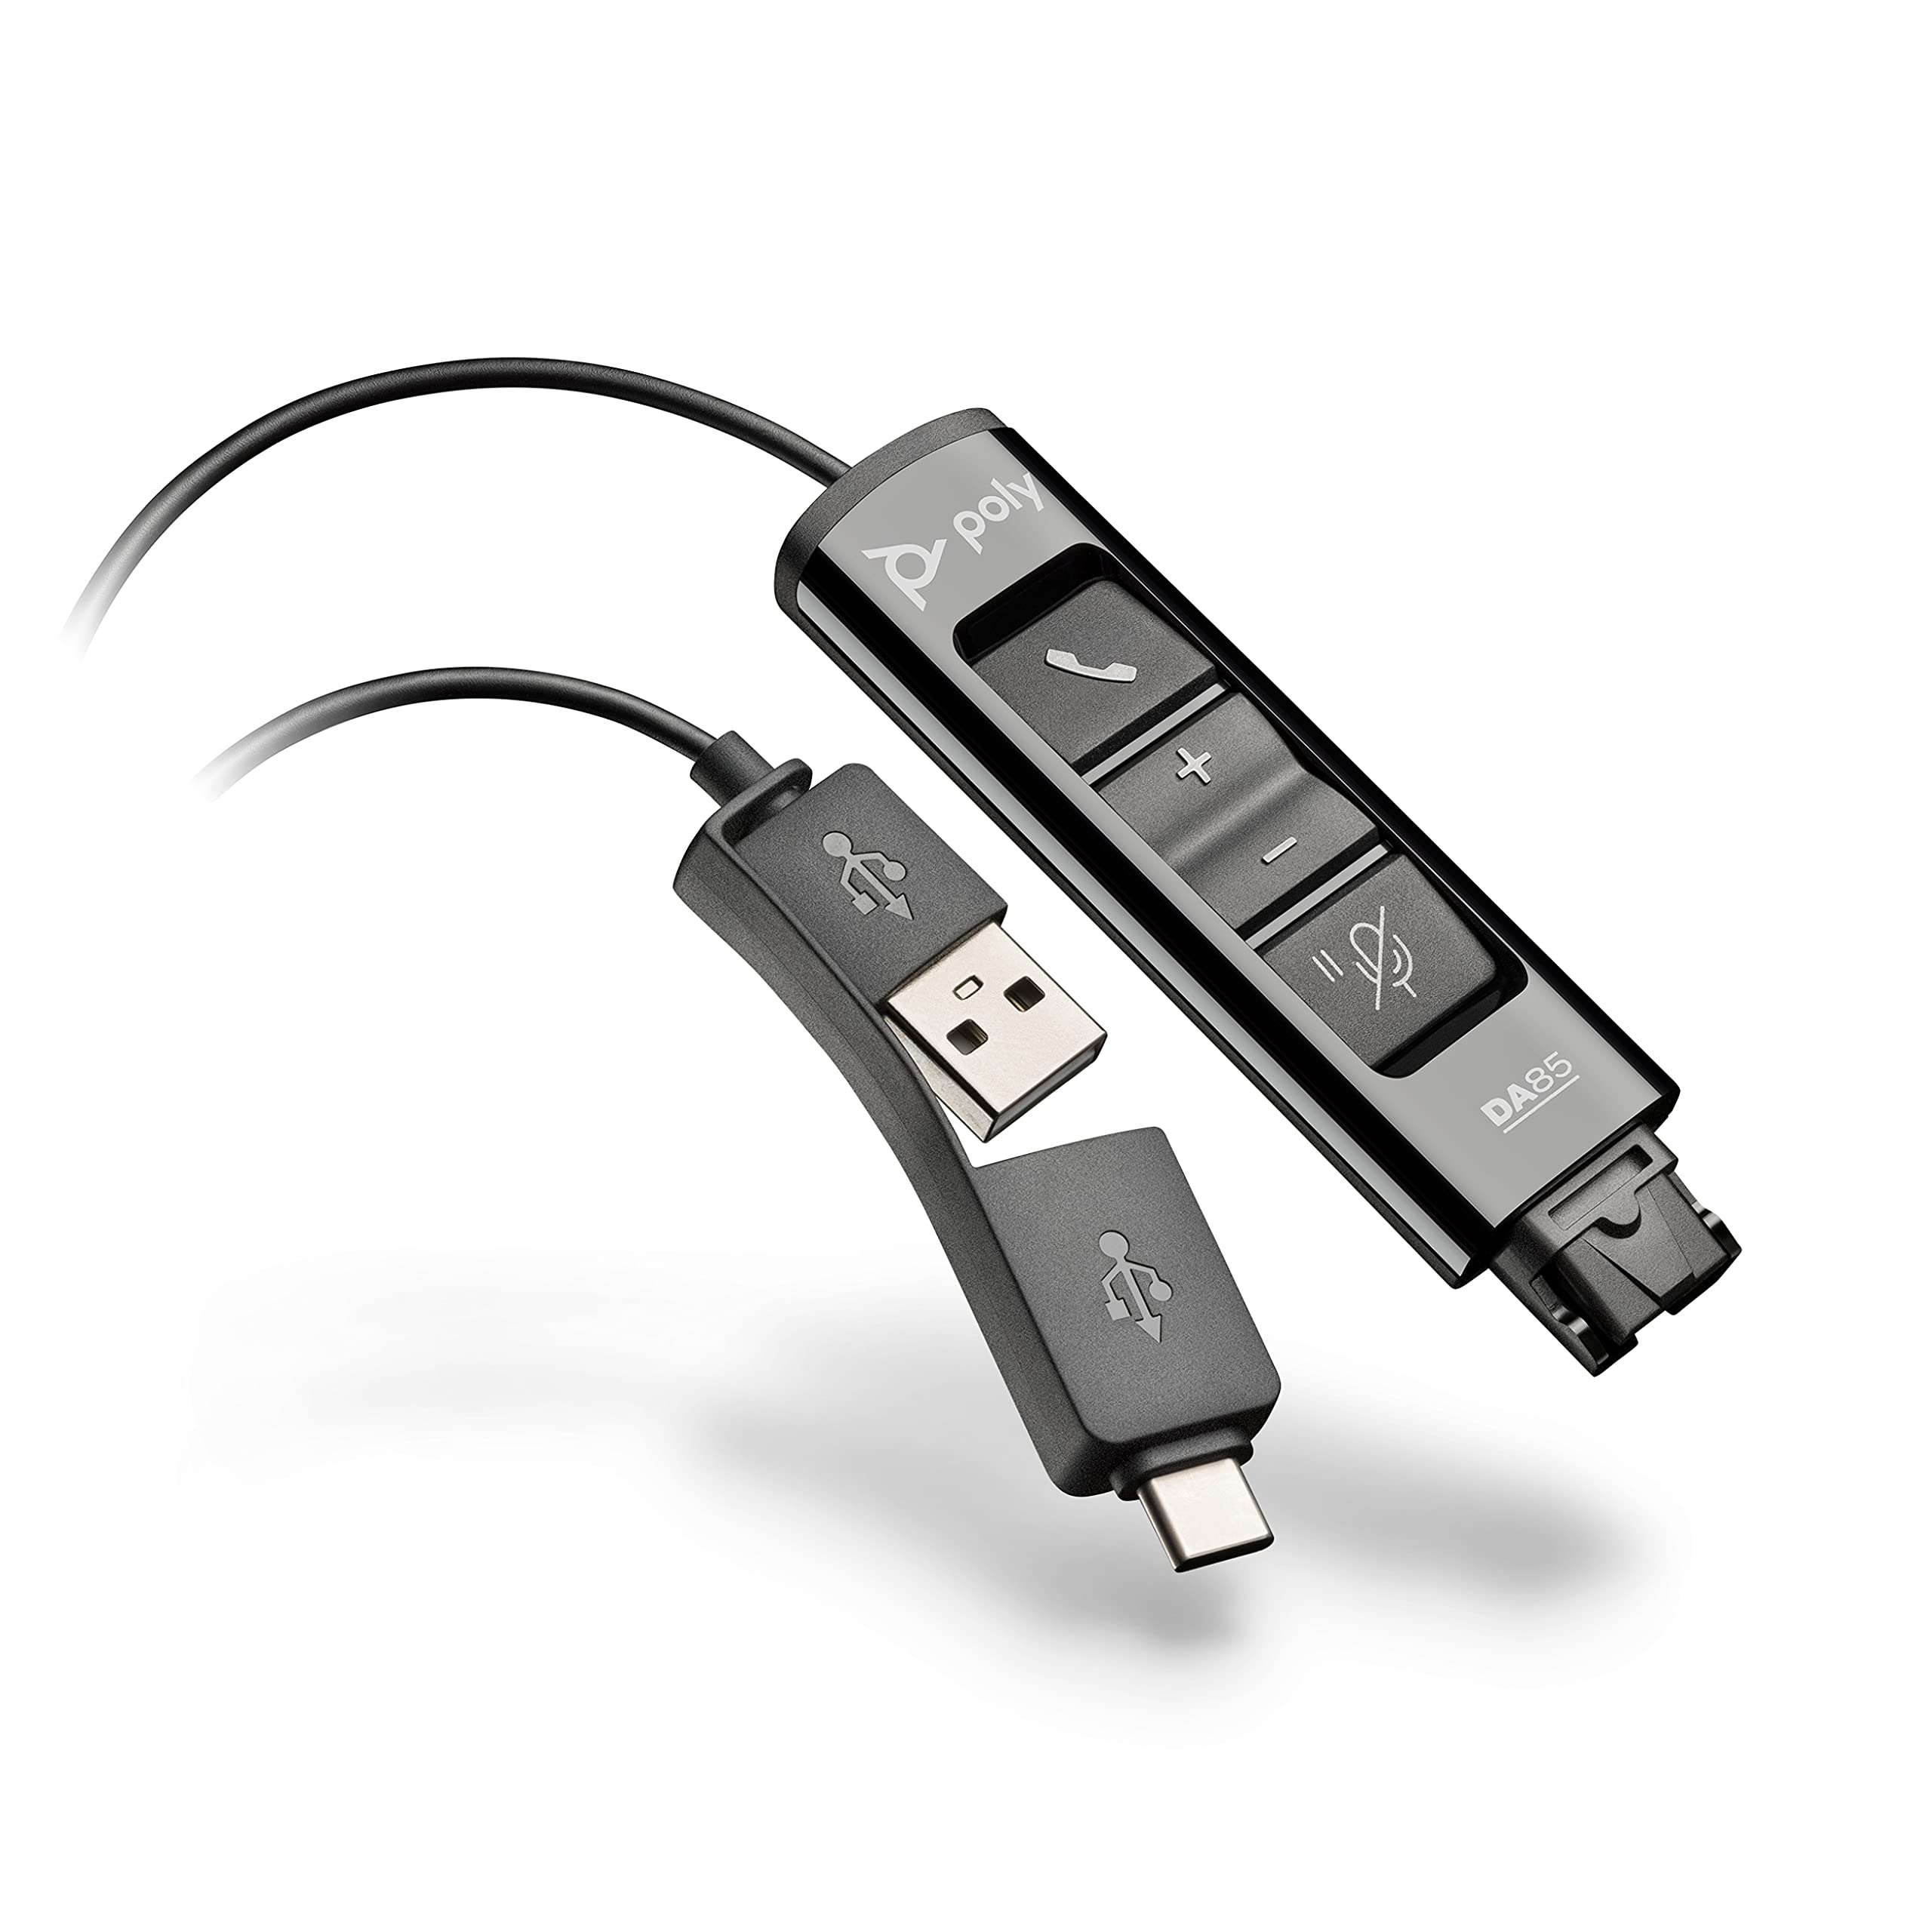 USB port with a disconnected USB dongle